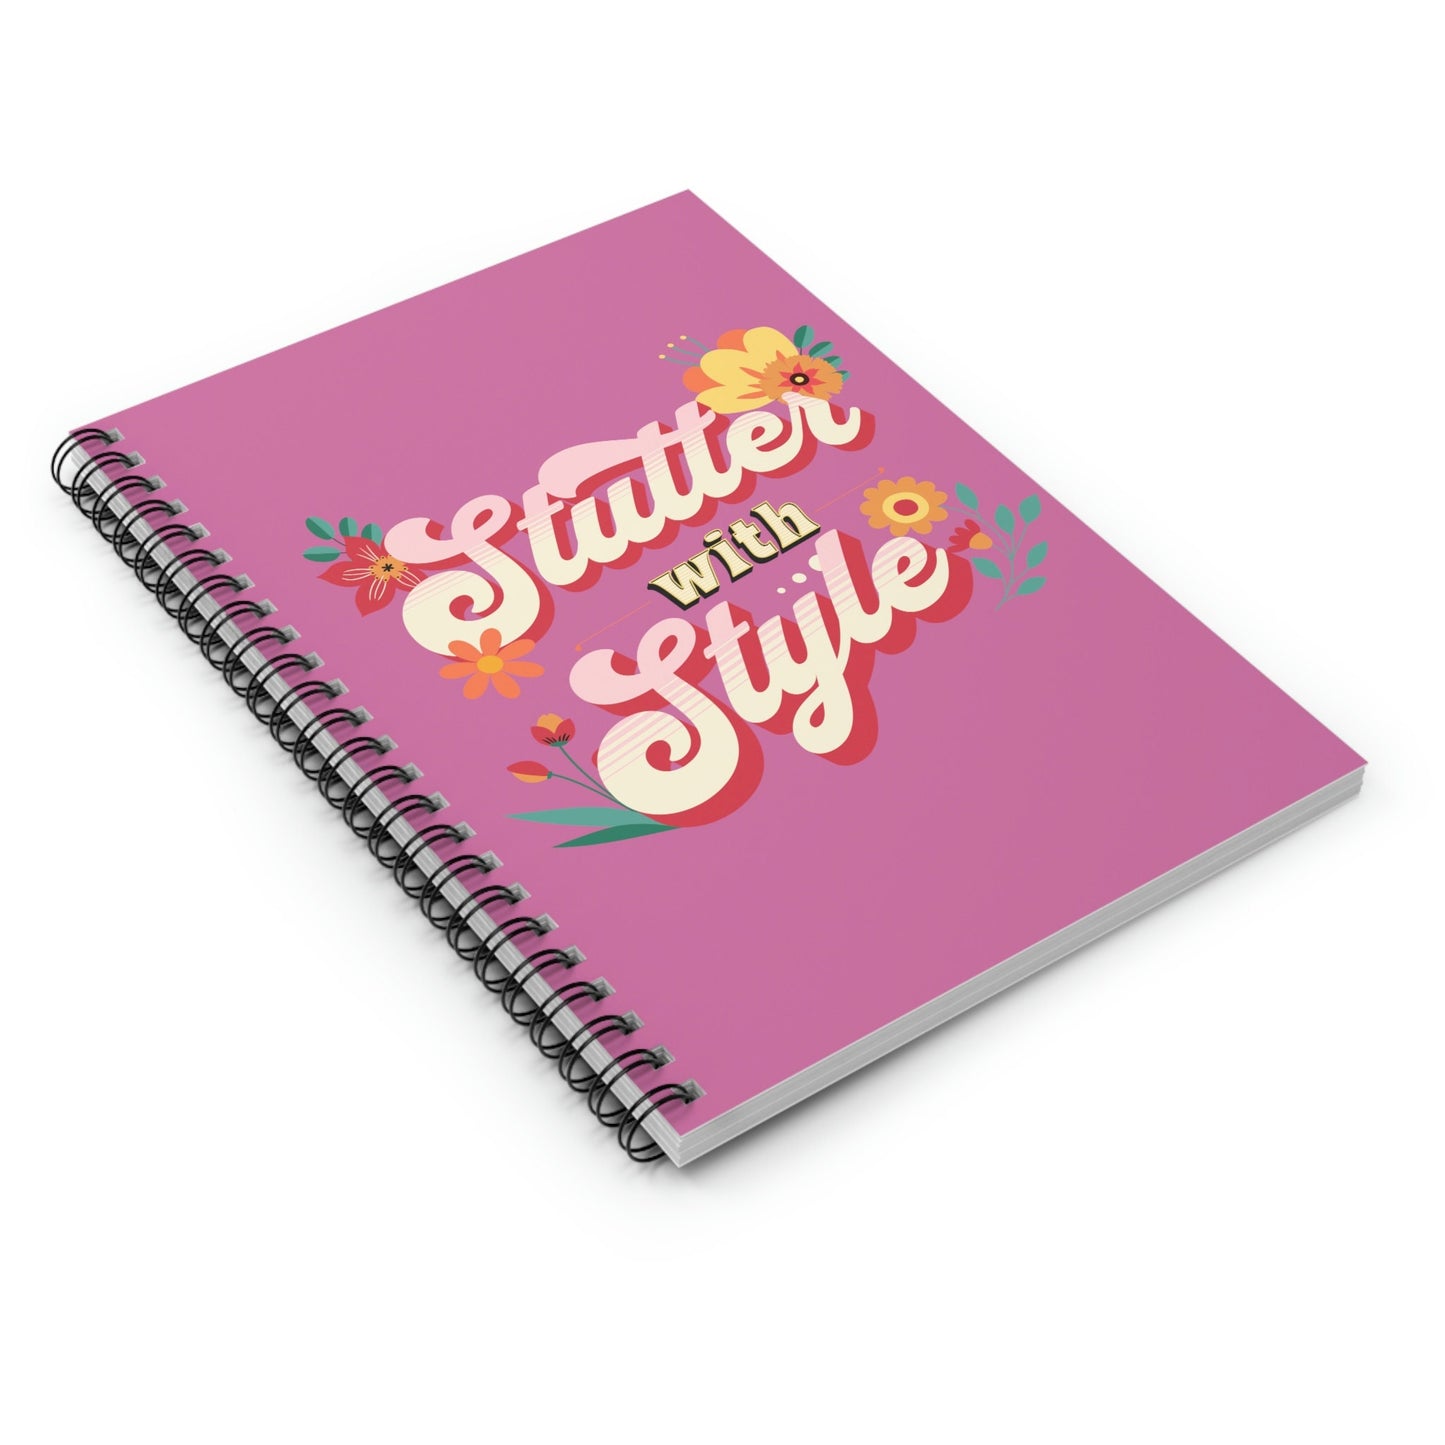 Stutter with Style Floral Gift Notebook